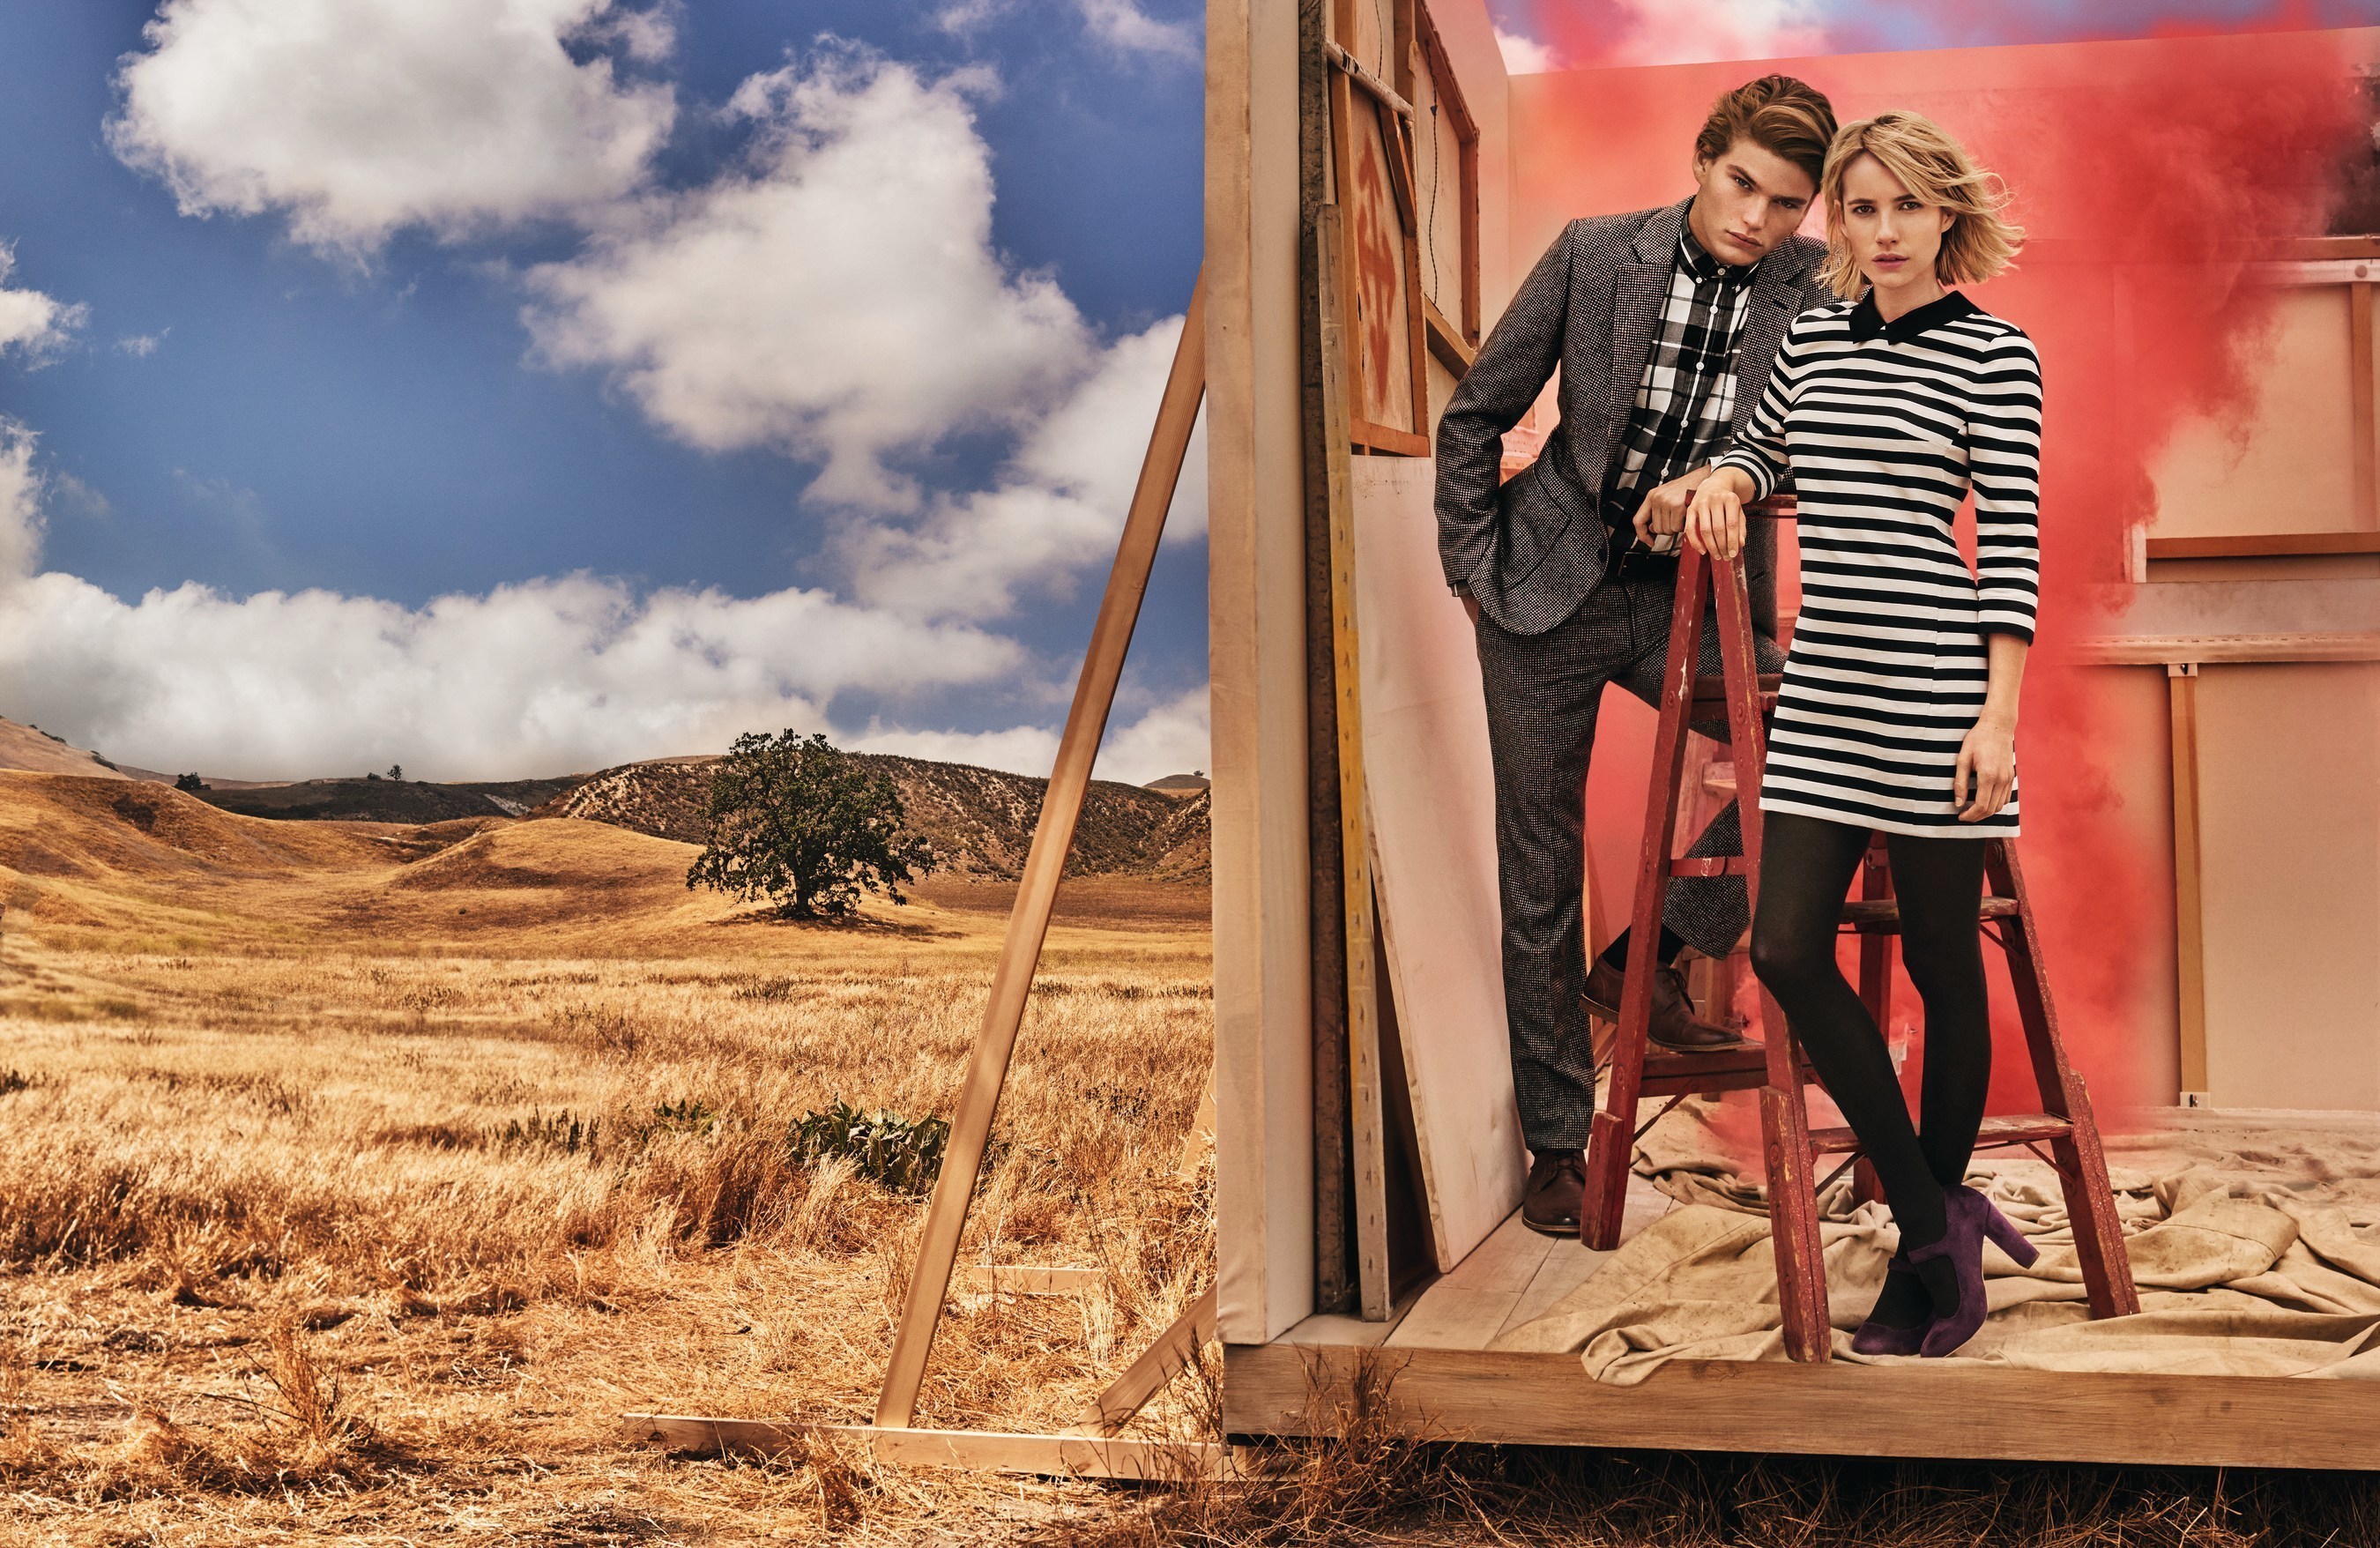 Emma Roberts has a new role, the face of Canvas by Lands' End's fall campaign. Photographed by Mario Testino, the campaign centers around the beautiful Roberts and Australian male model Jordan Barrett, wearing a mix of the pieces from the anticipated Canvas by Lands' End(TM) fall collection.